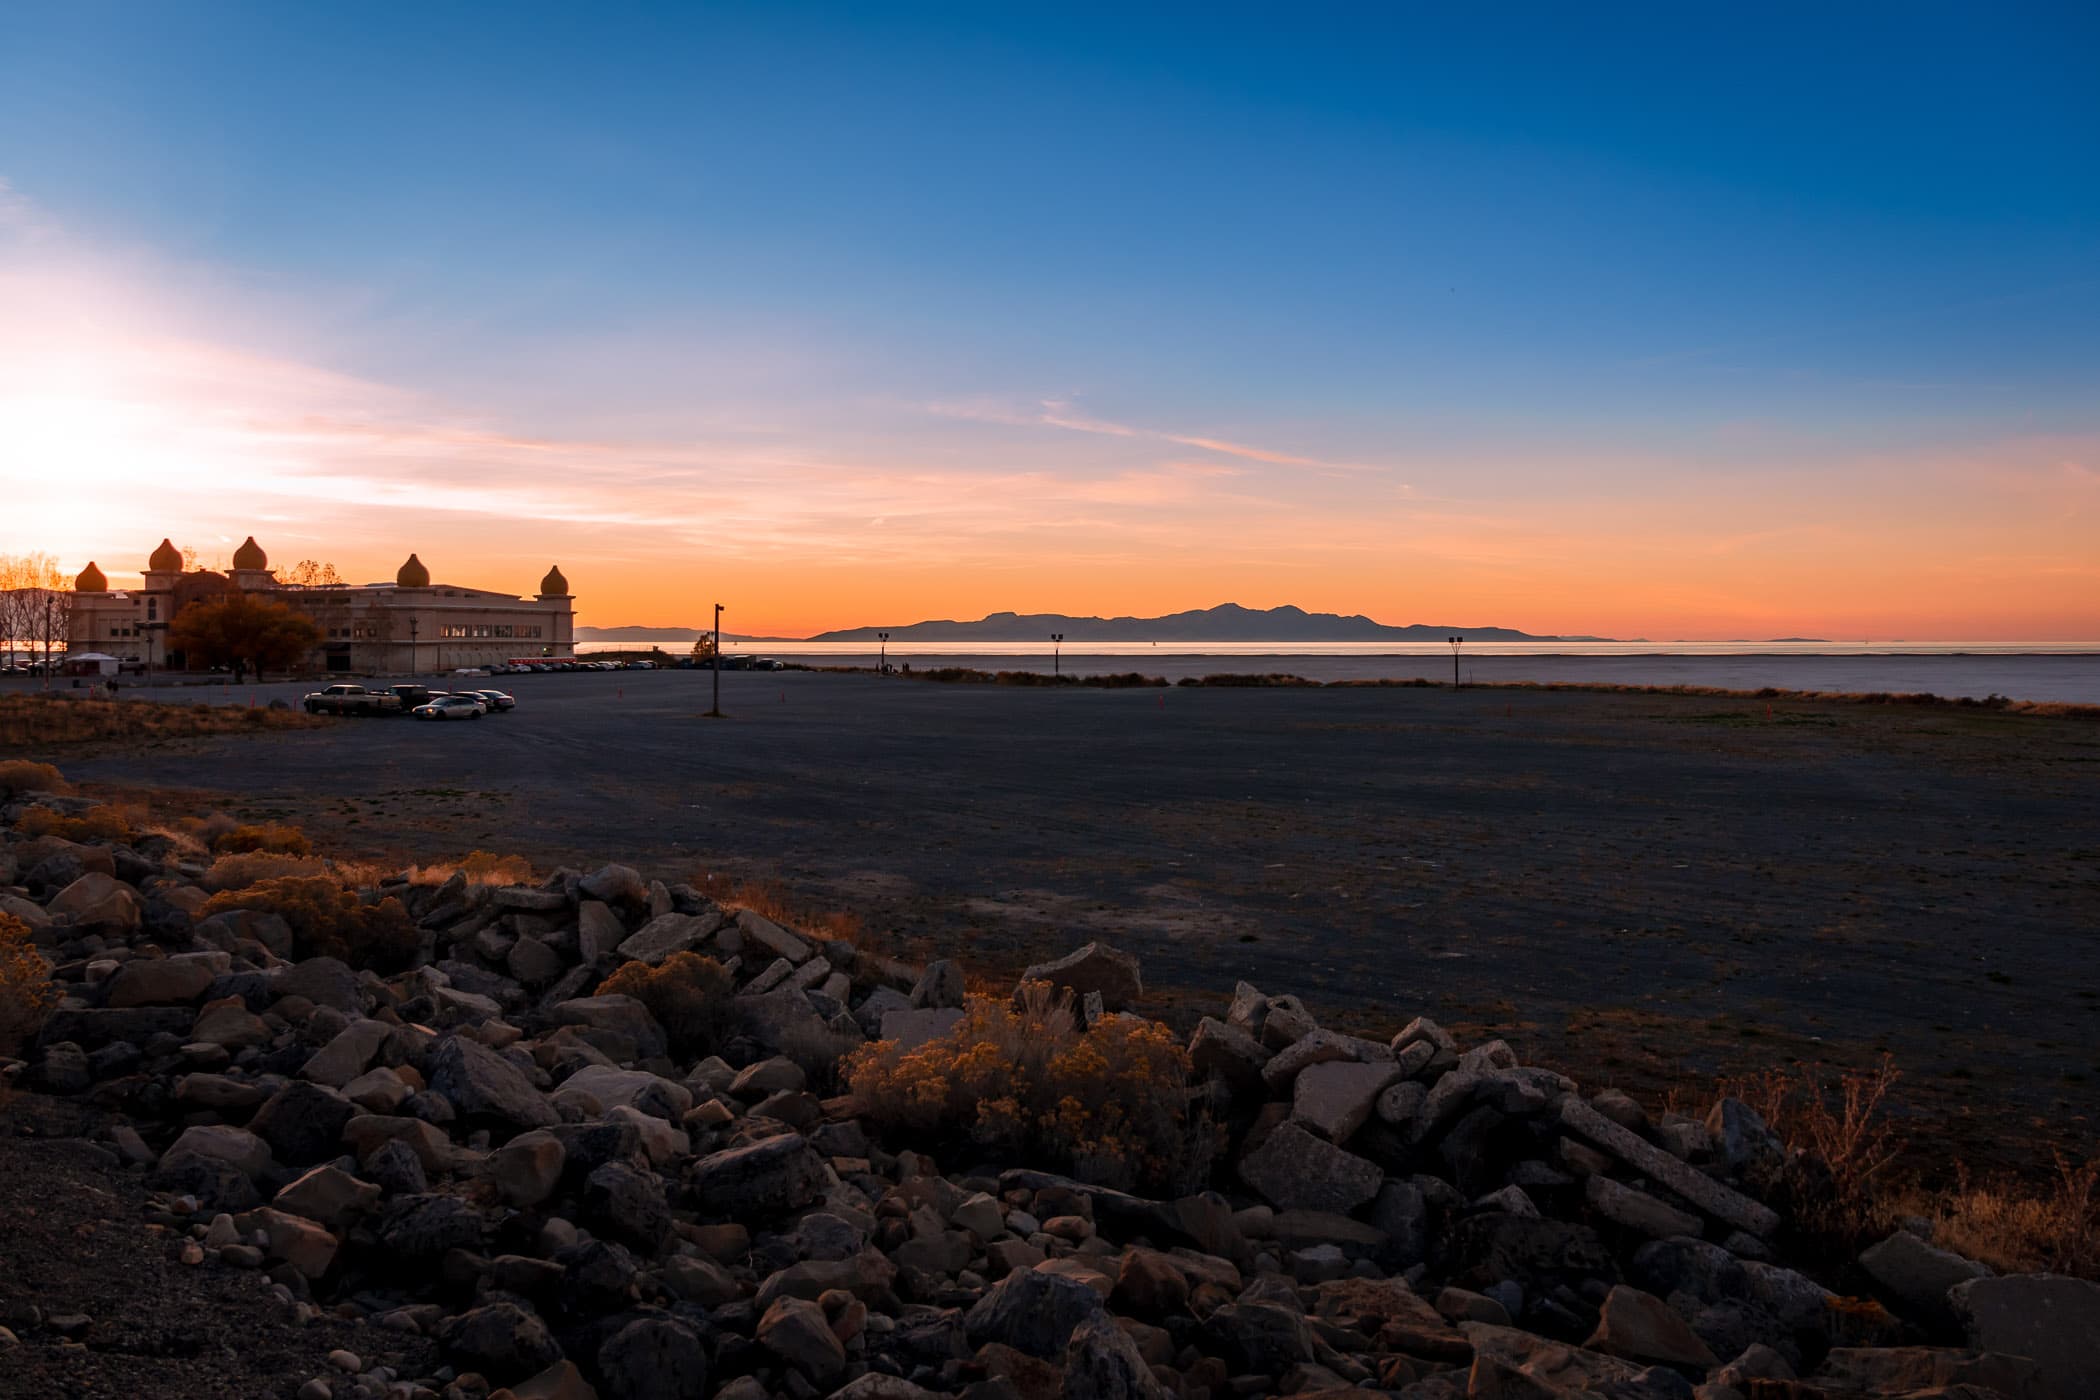 The sun sets on the Saltair concert venue along the southern shore of Utah's Great Salt Lake near Tooele.